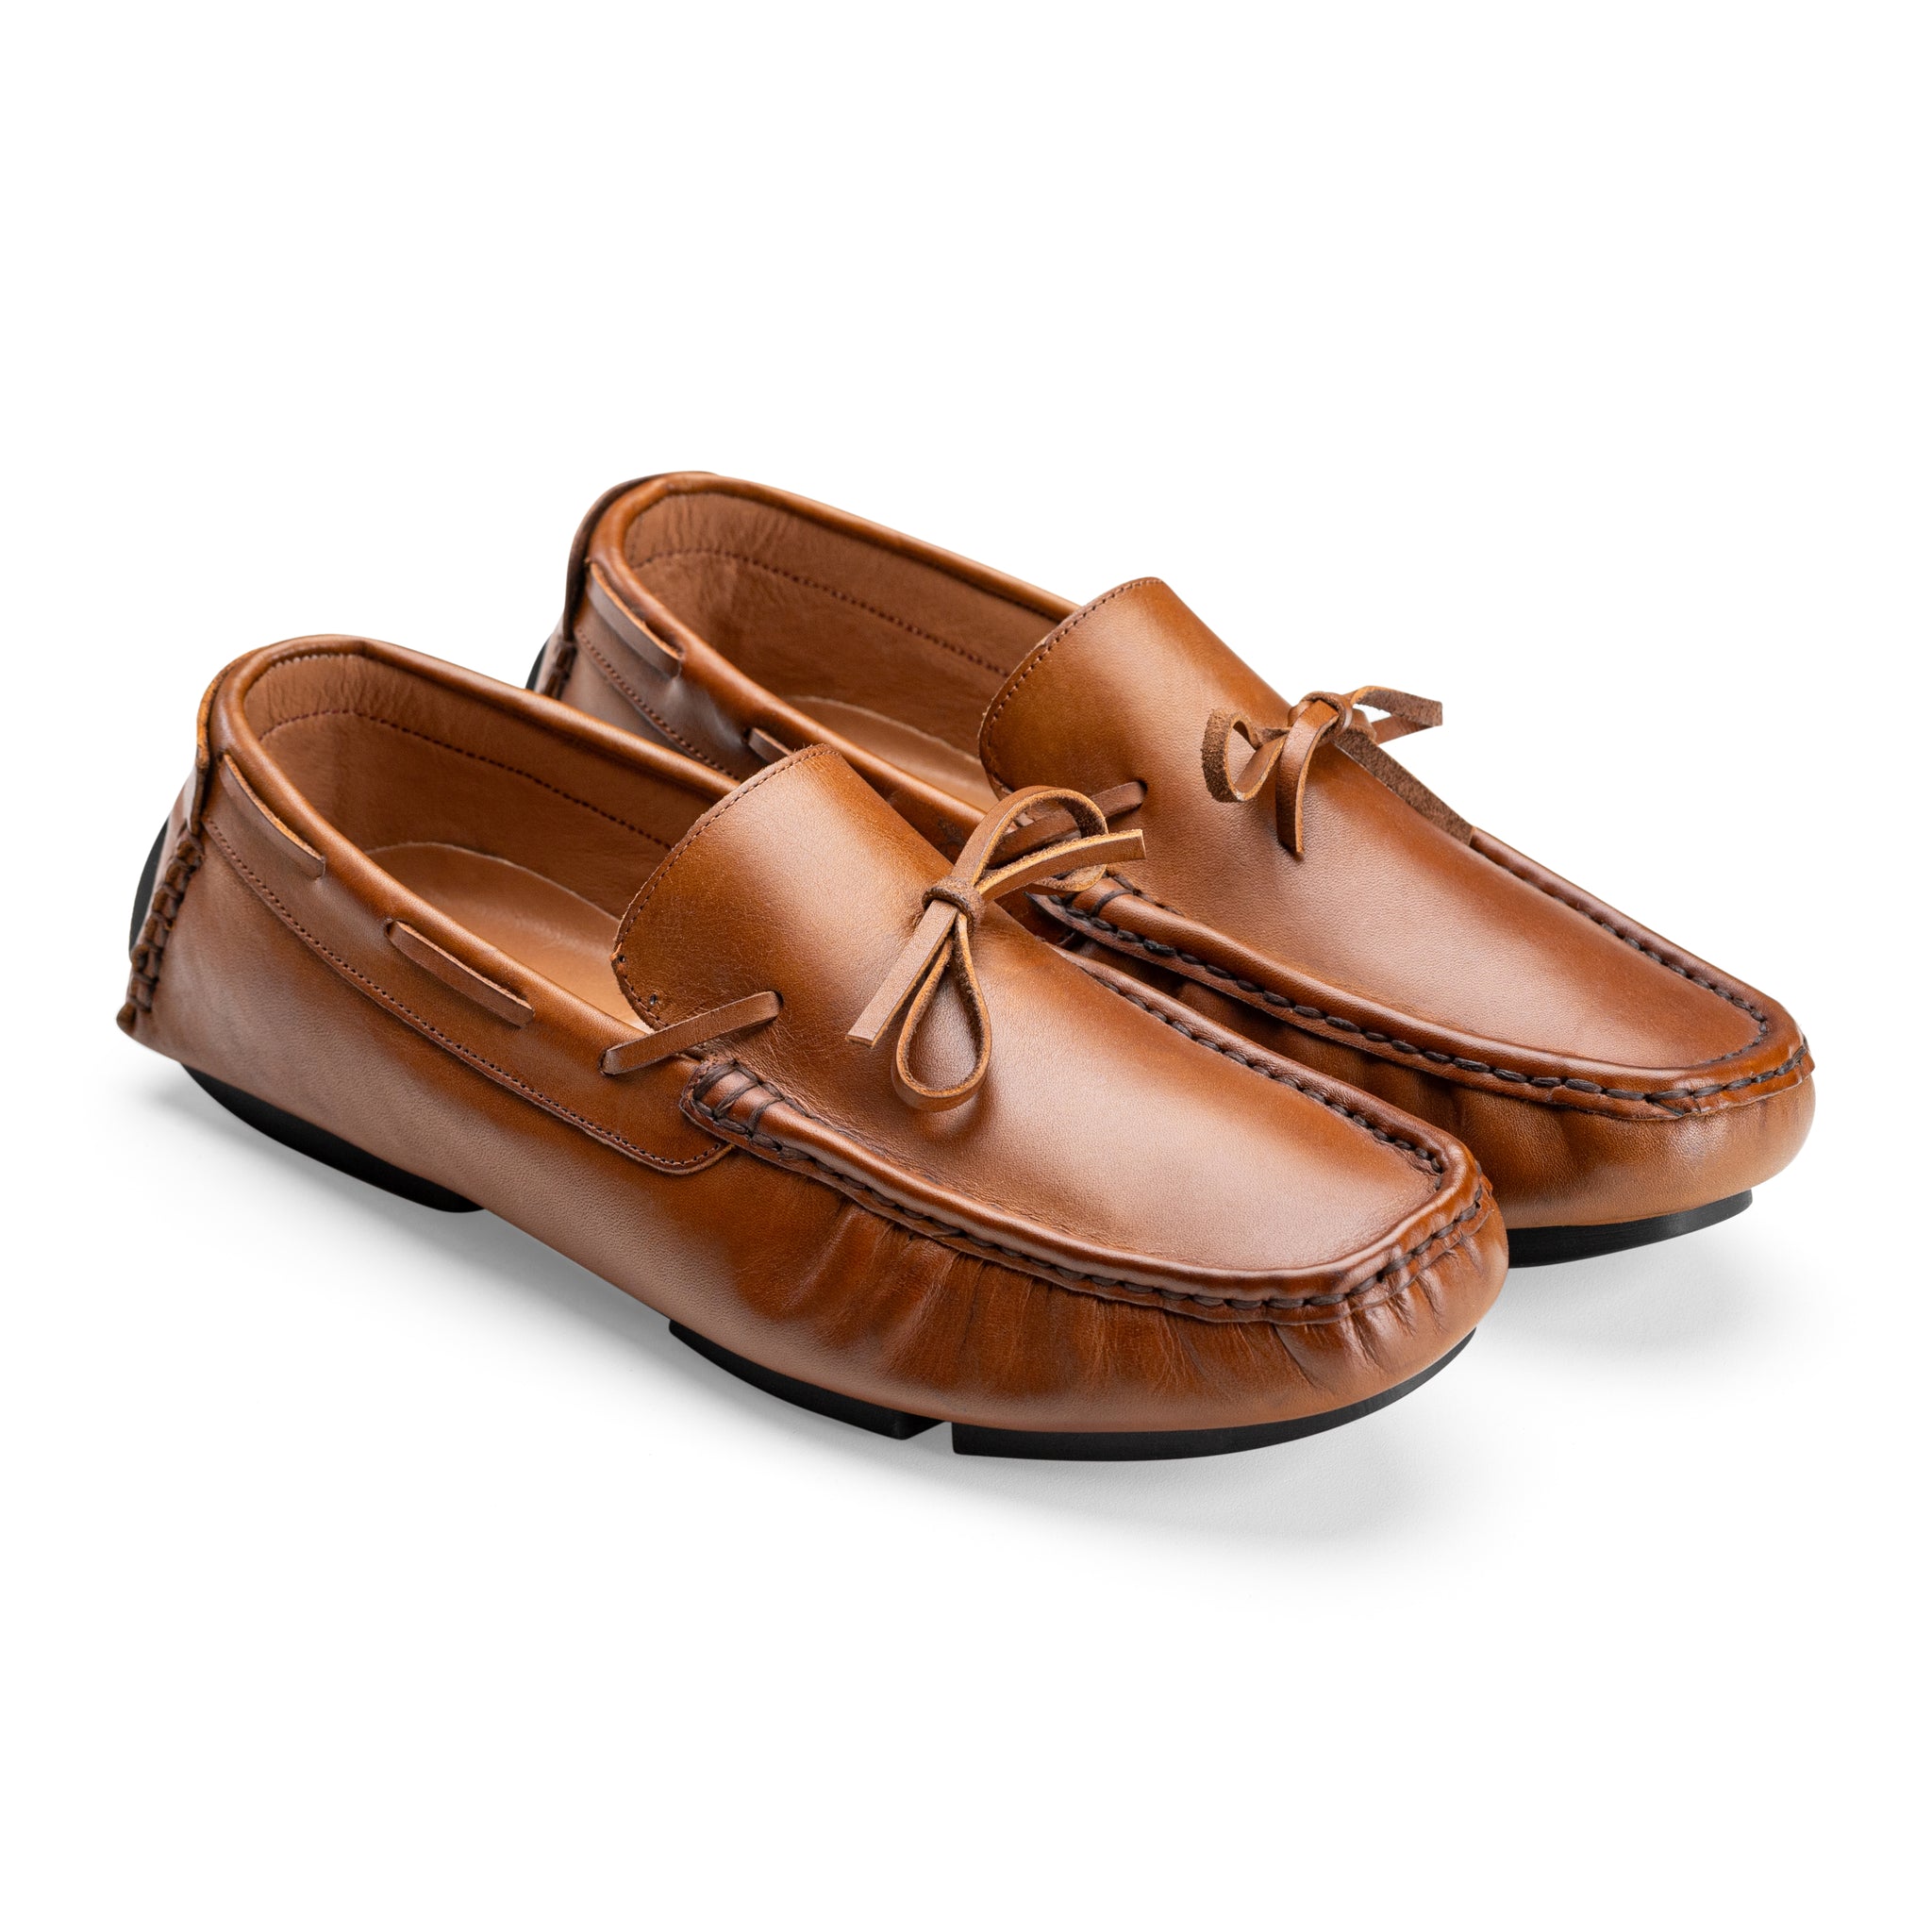 Moccasins | Suede calf leather rubber sole -Brown